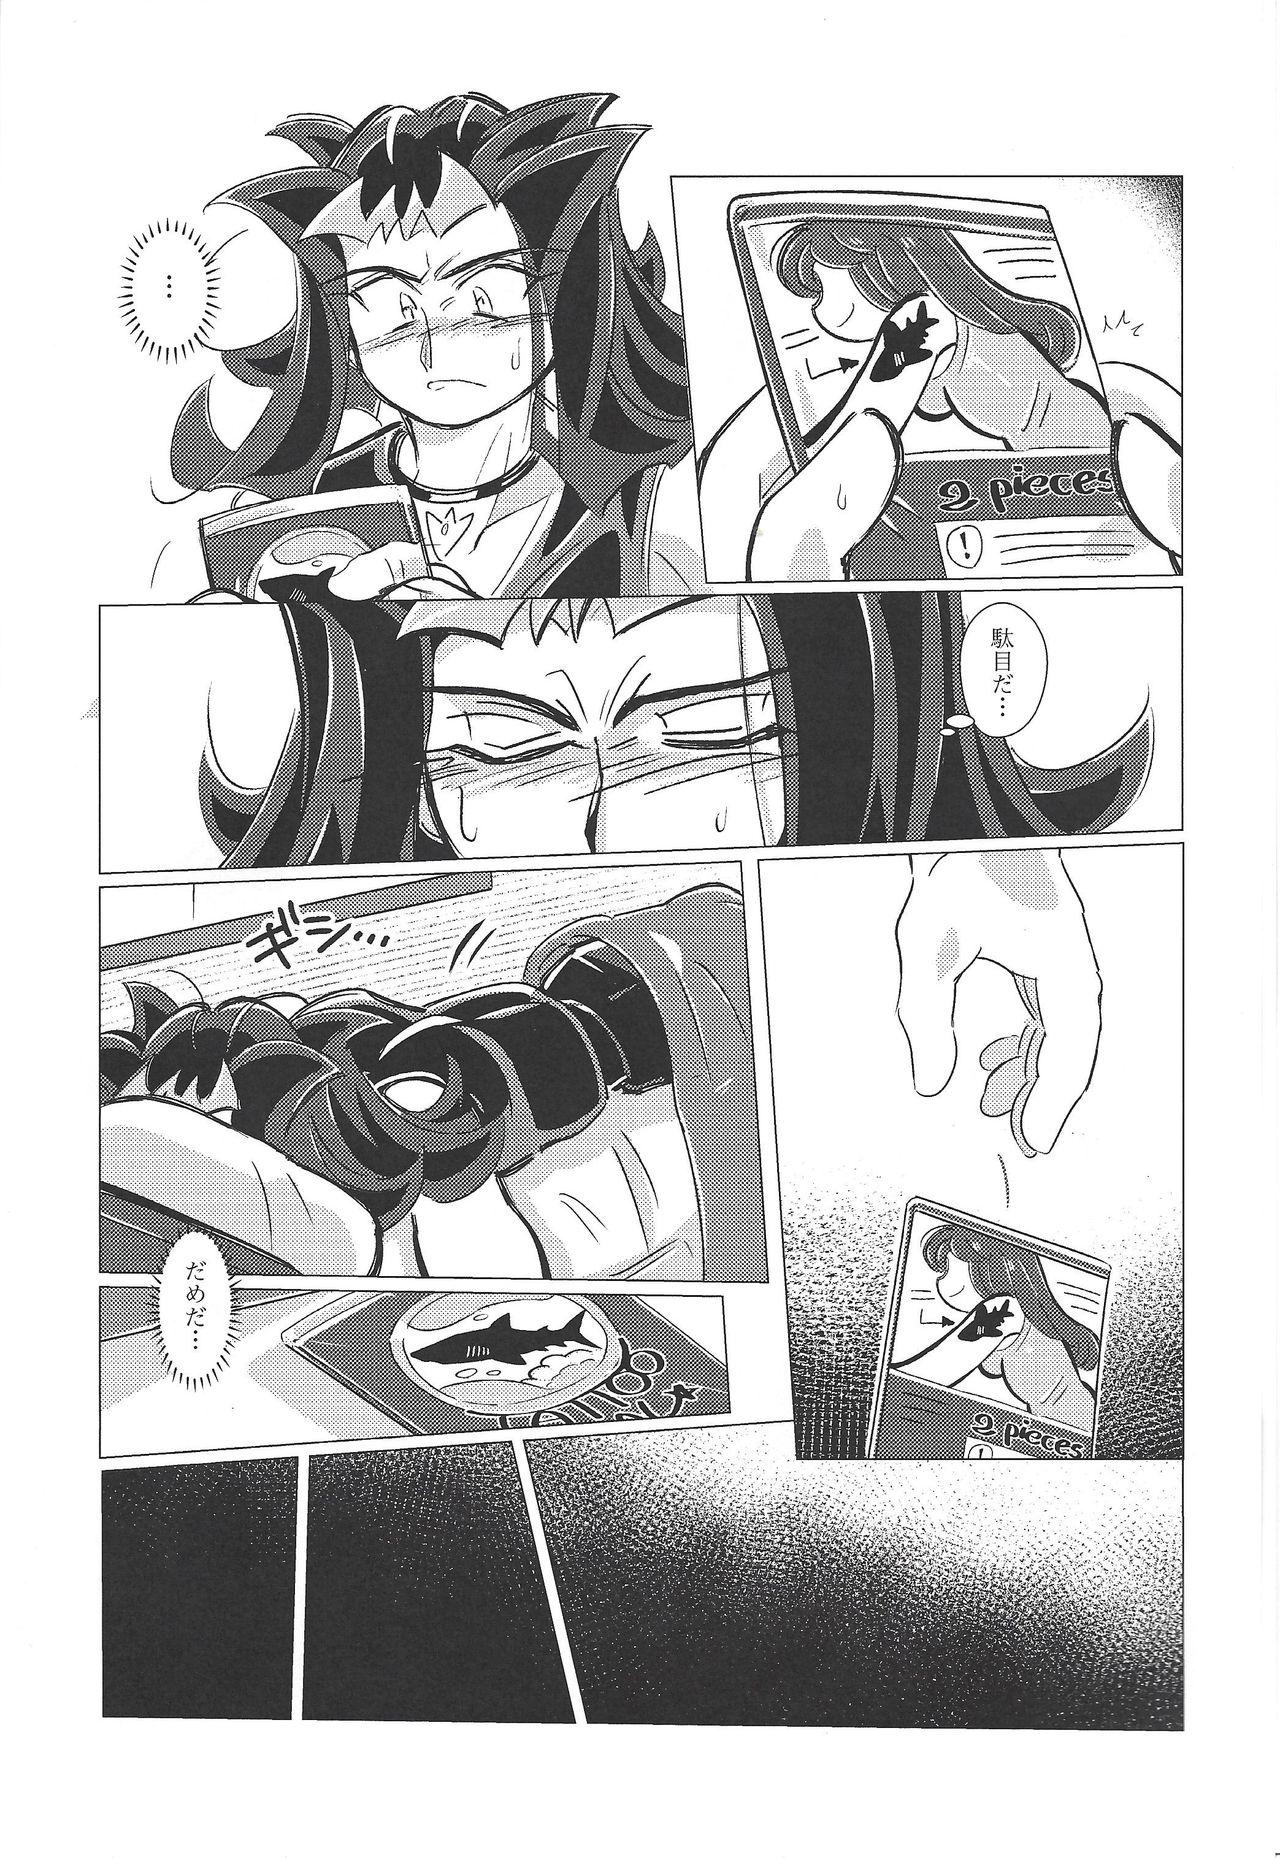 Argentino Marking Desire - Yu-gi-oh zexal Camporn - Page 9